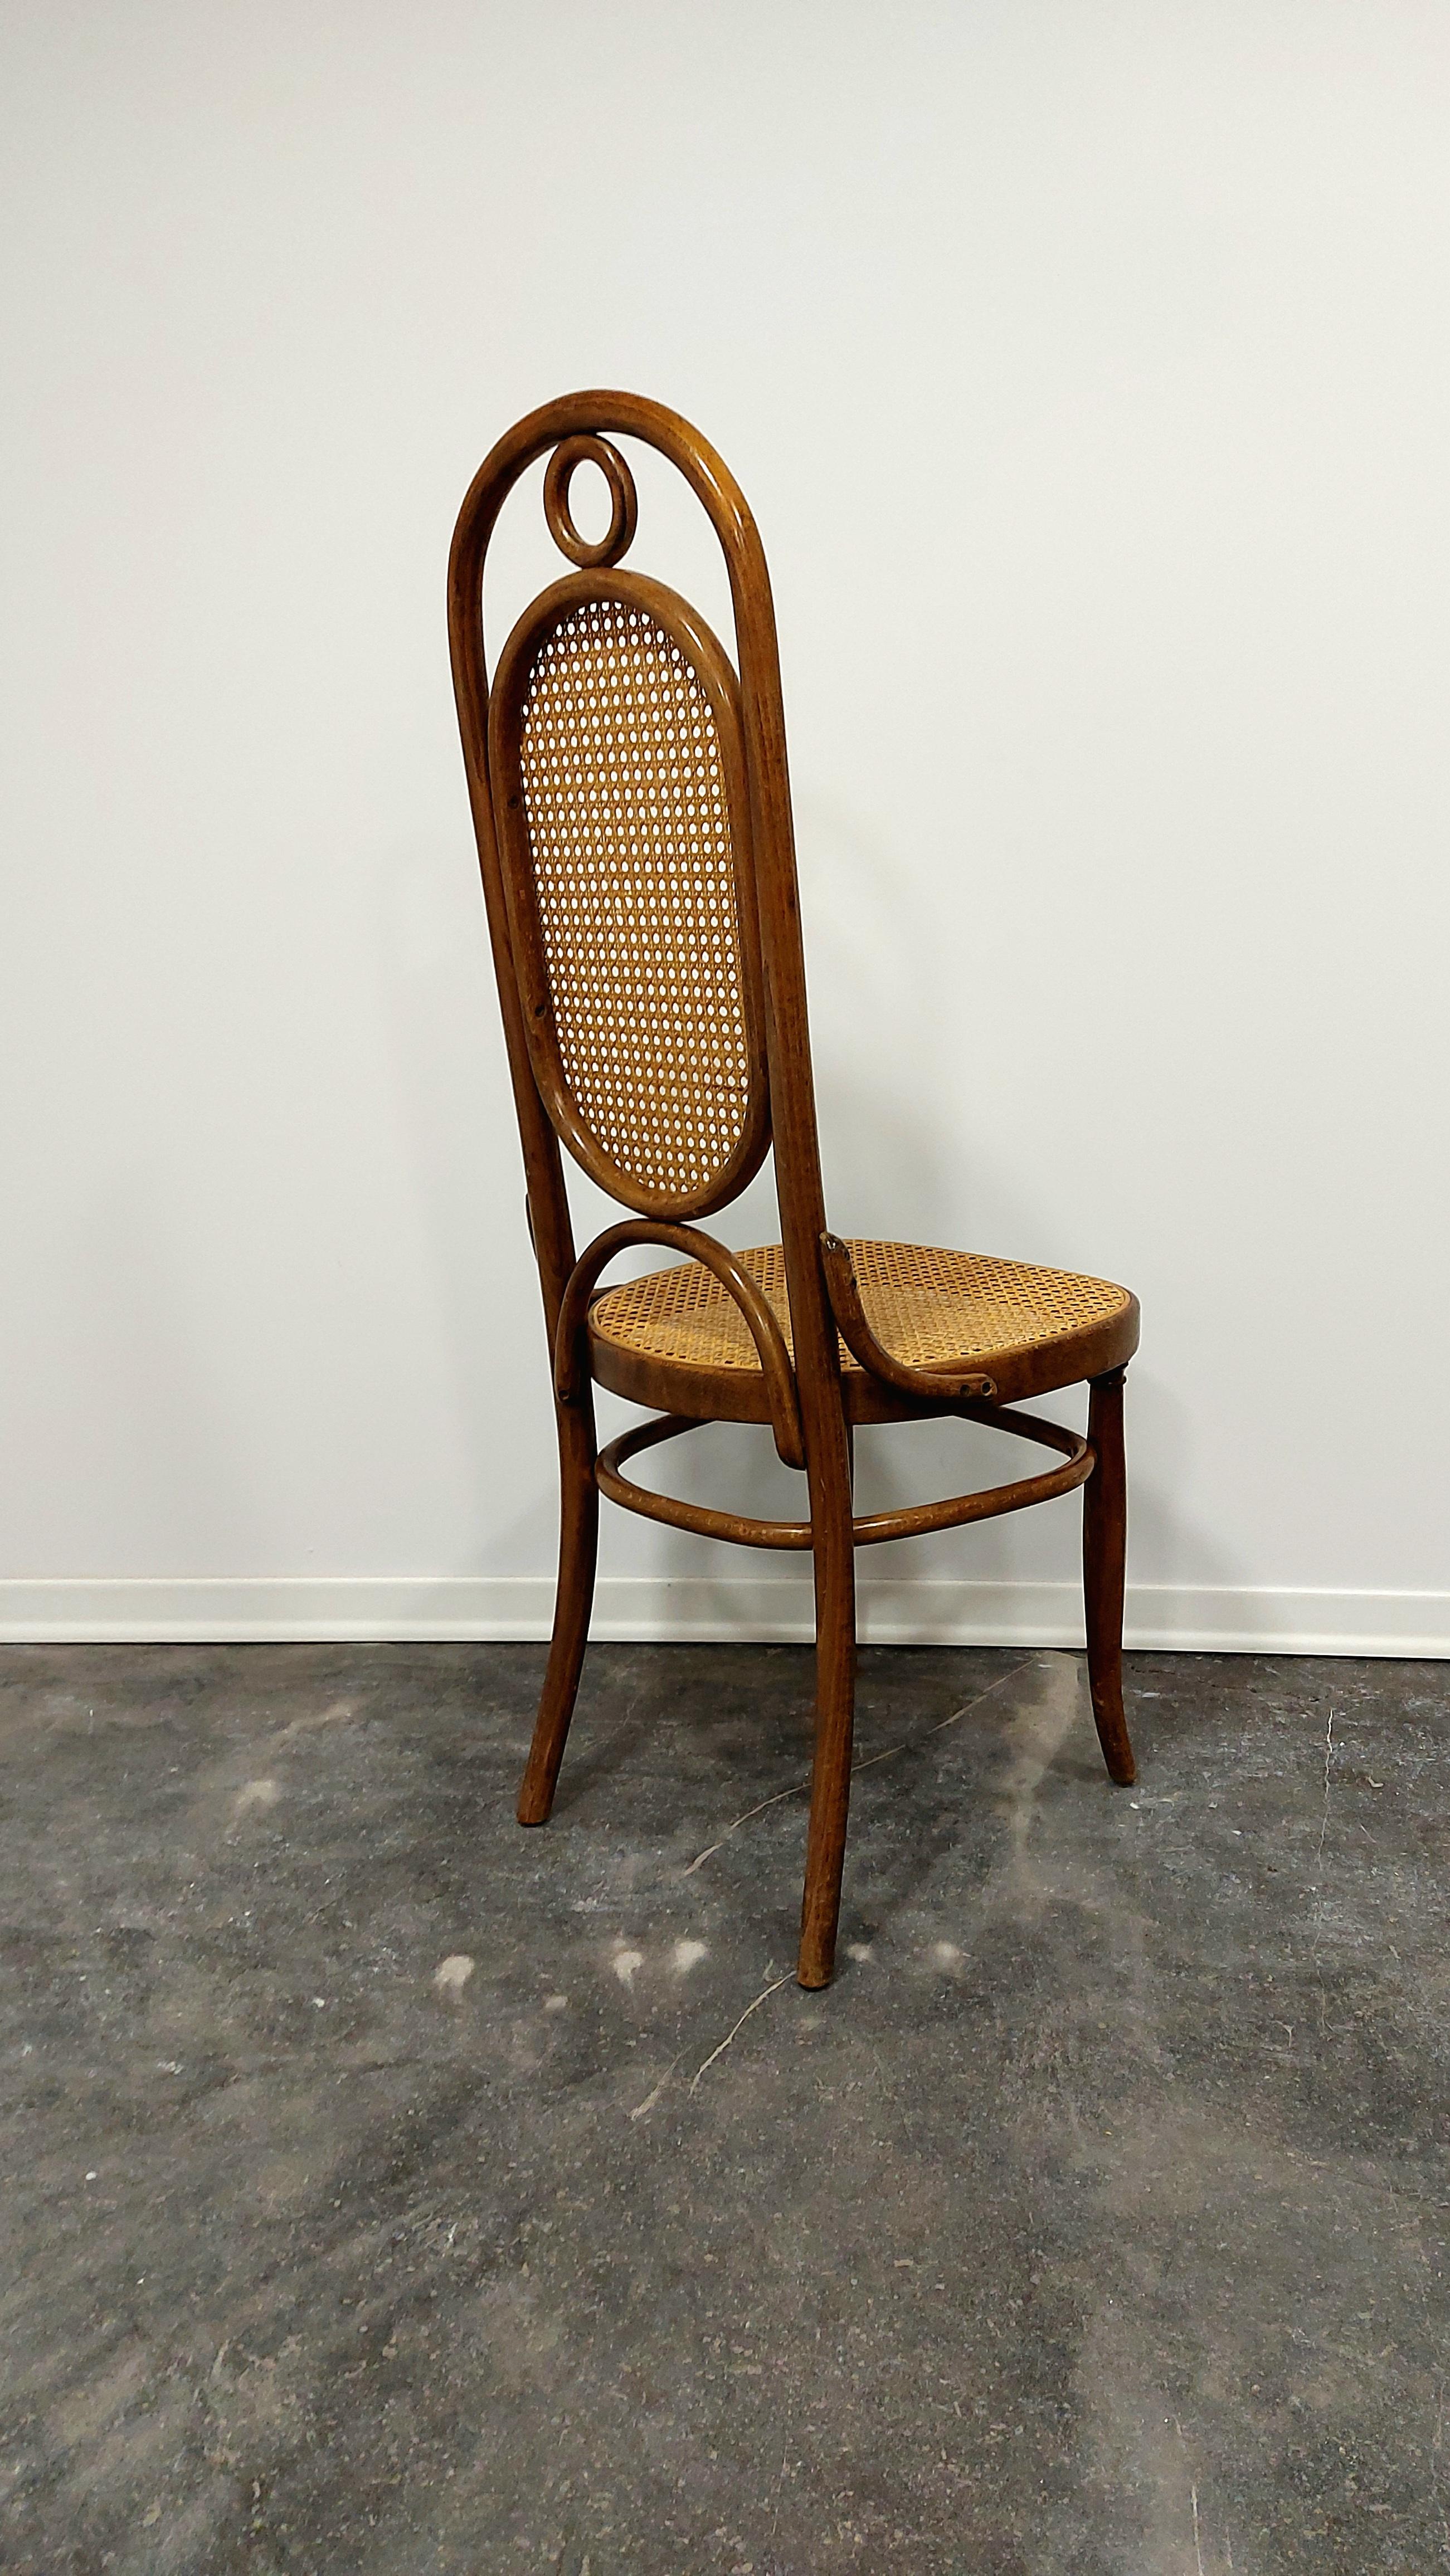 Cane Dining Chairs, Bentwood, M 17, High Back, 1 of 6 For Sale